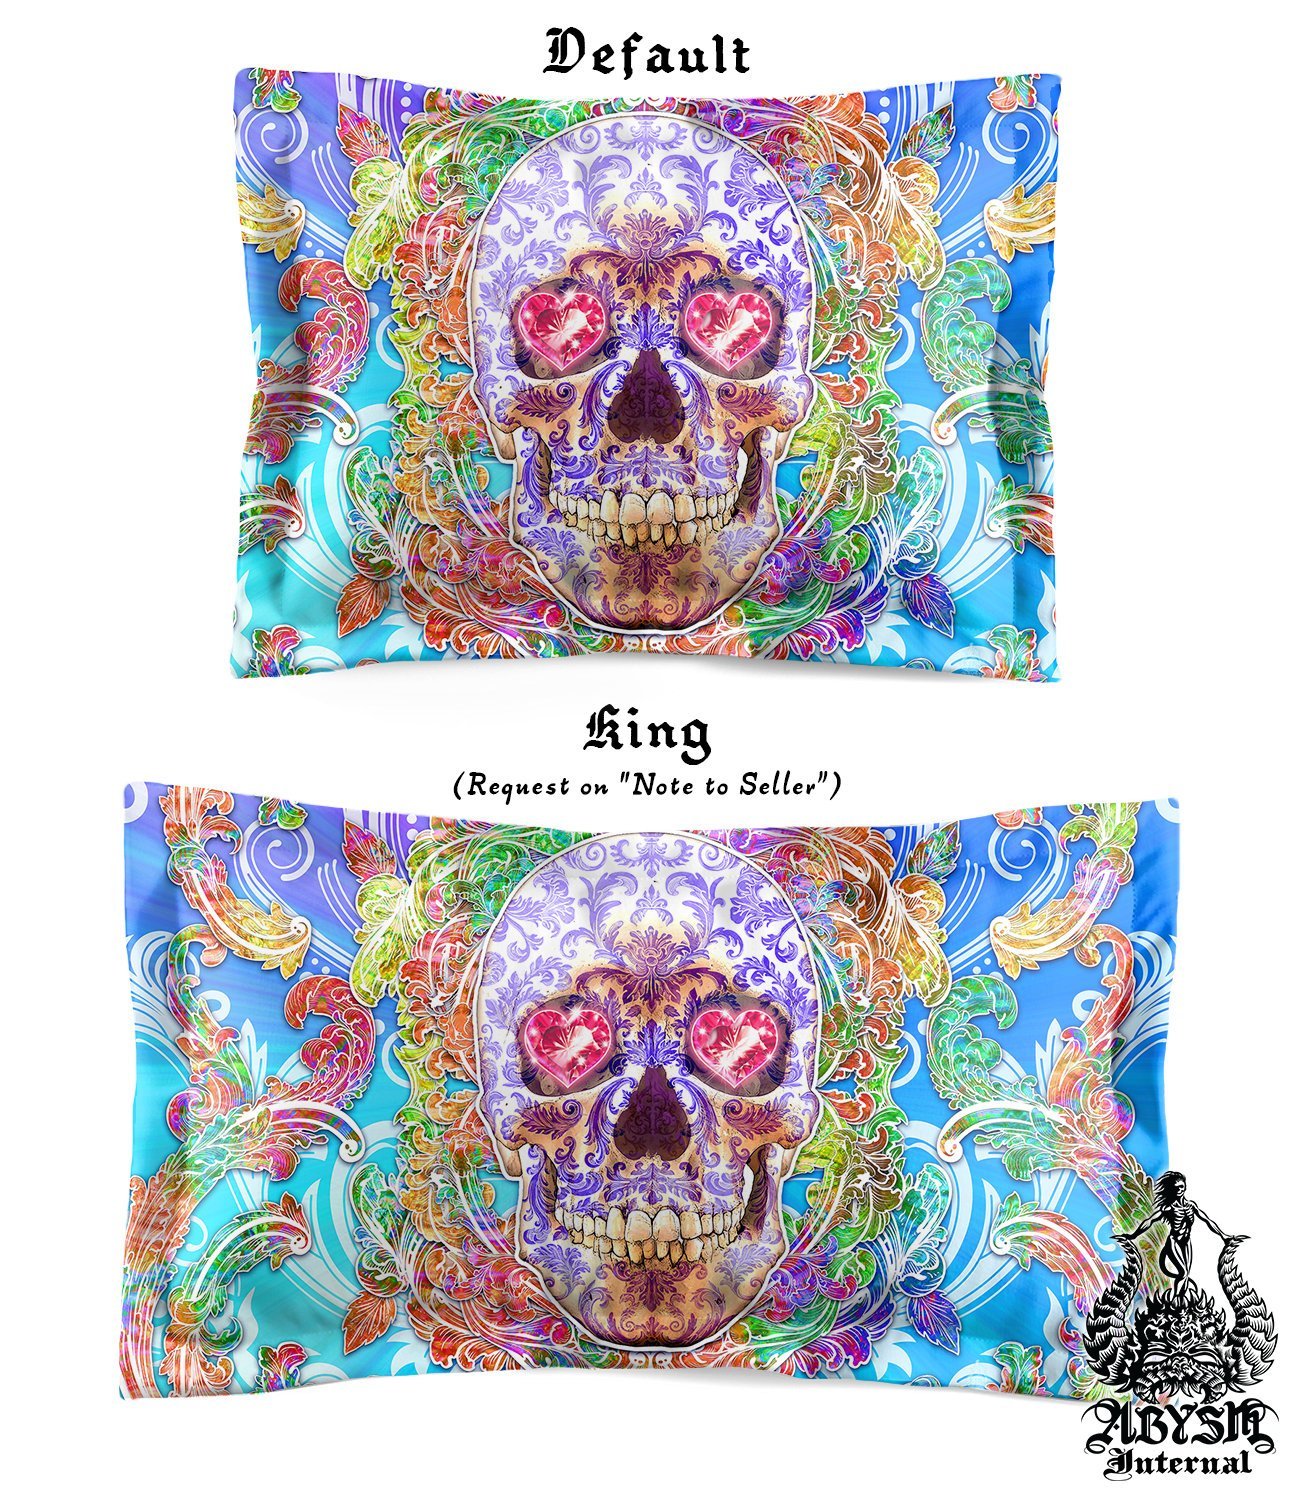 Skull Bedding Set, Comforter and Duvet, Indie Bed Cover, Indie Bedroom Decor, King, Queen and Twin Size - Creepy Cute, Psy Purple - Abysm Internal